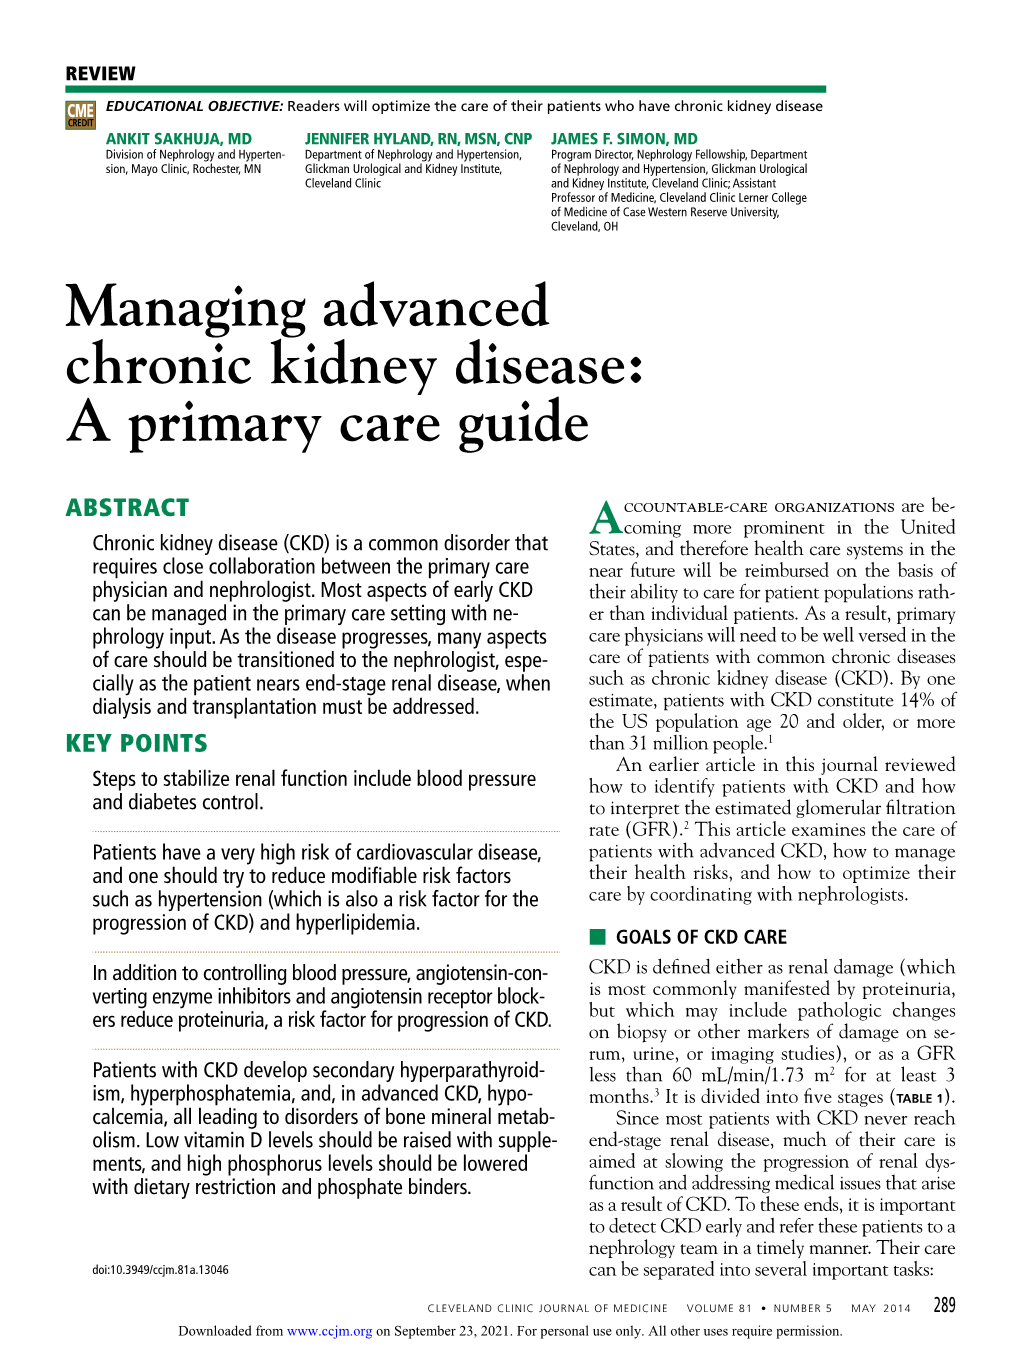 Managing Advanced Chronic Kidney Disease: a Primary Care Guide